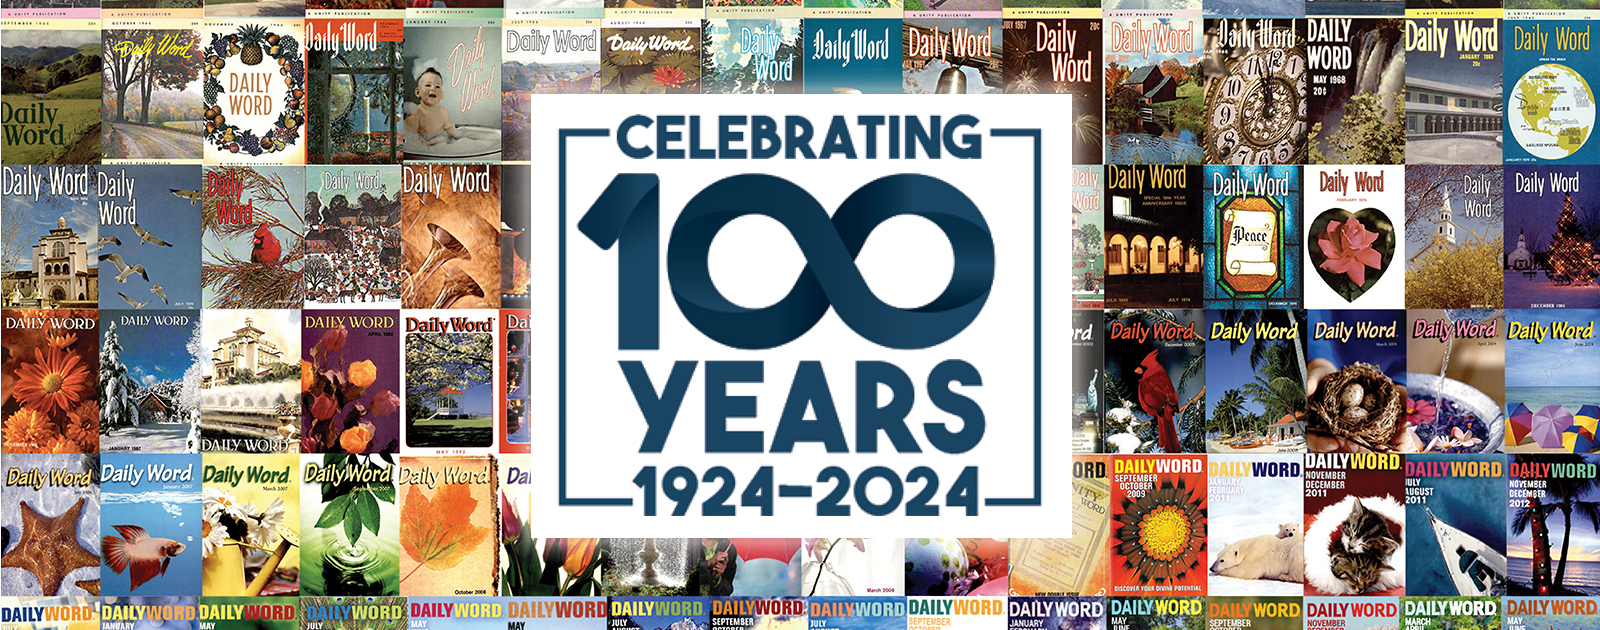 Celebrating 100 Years of Daily Word, 1924-2024